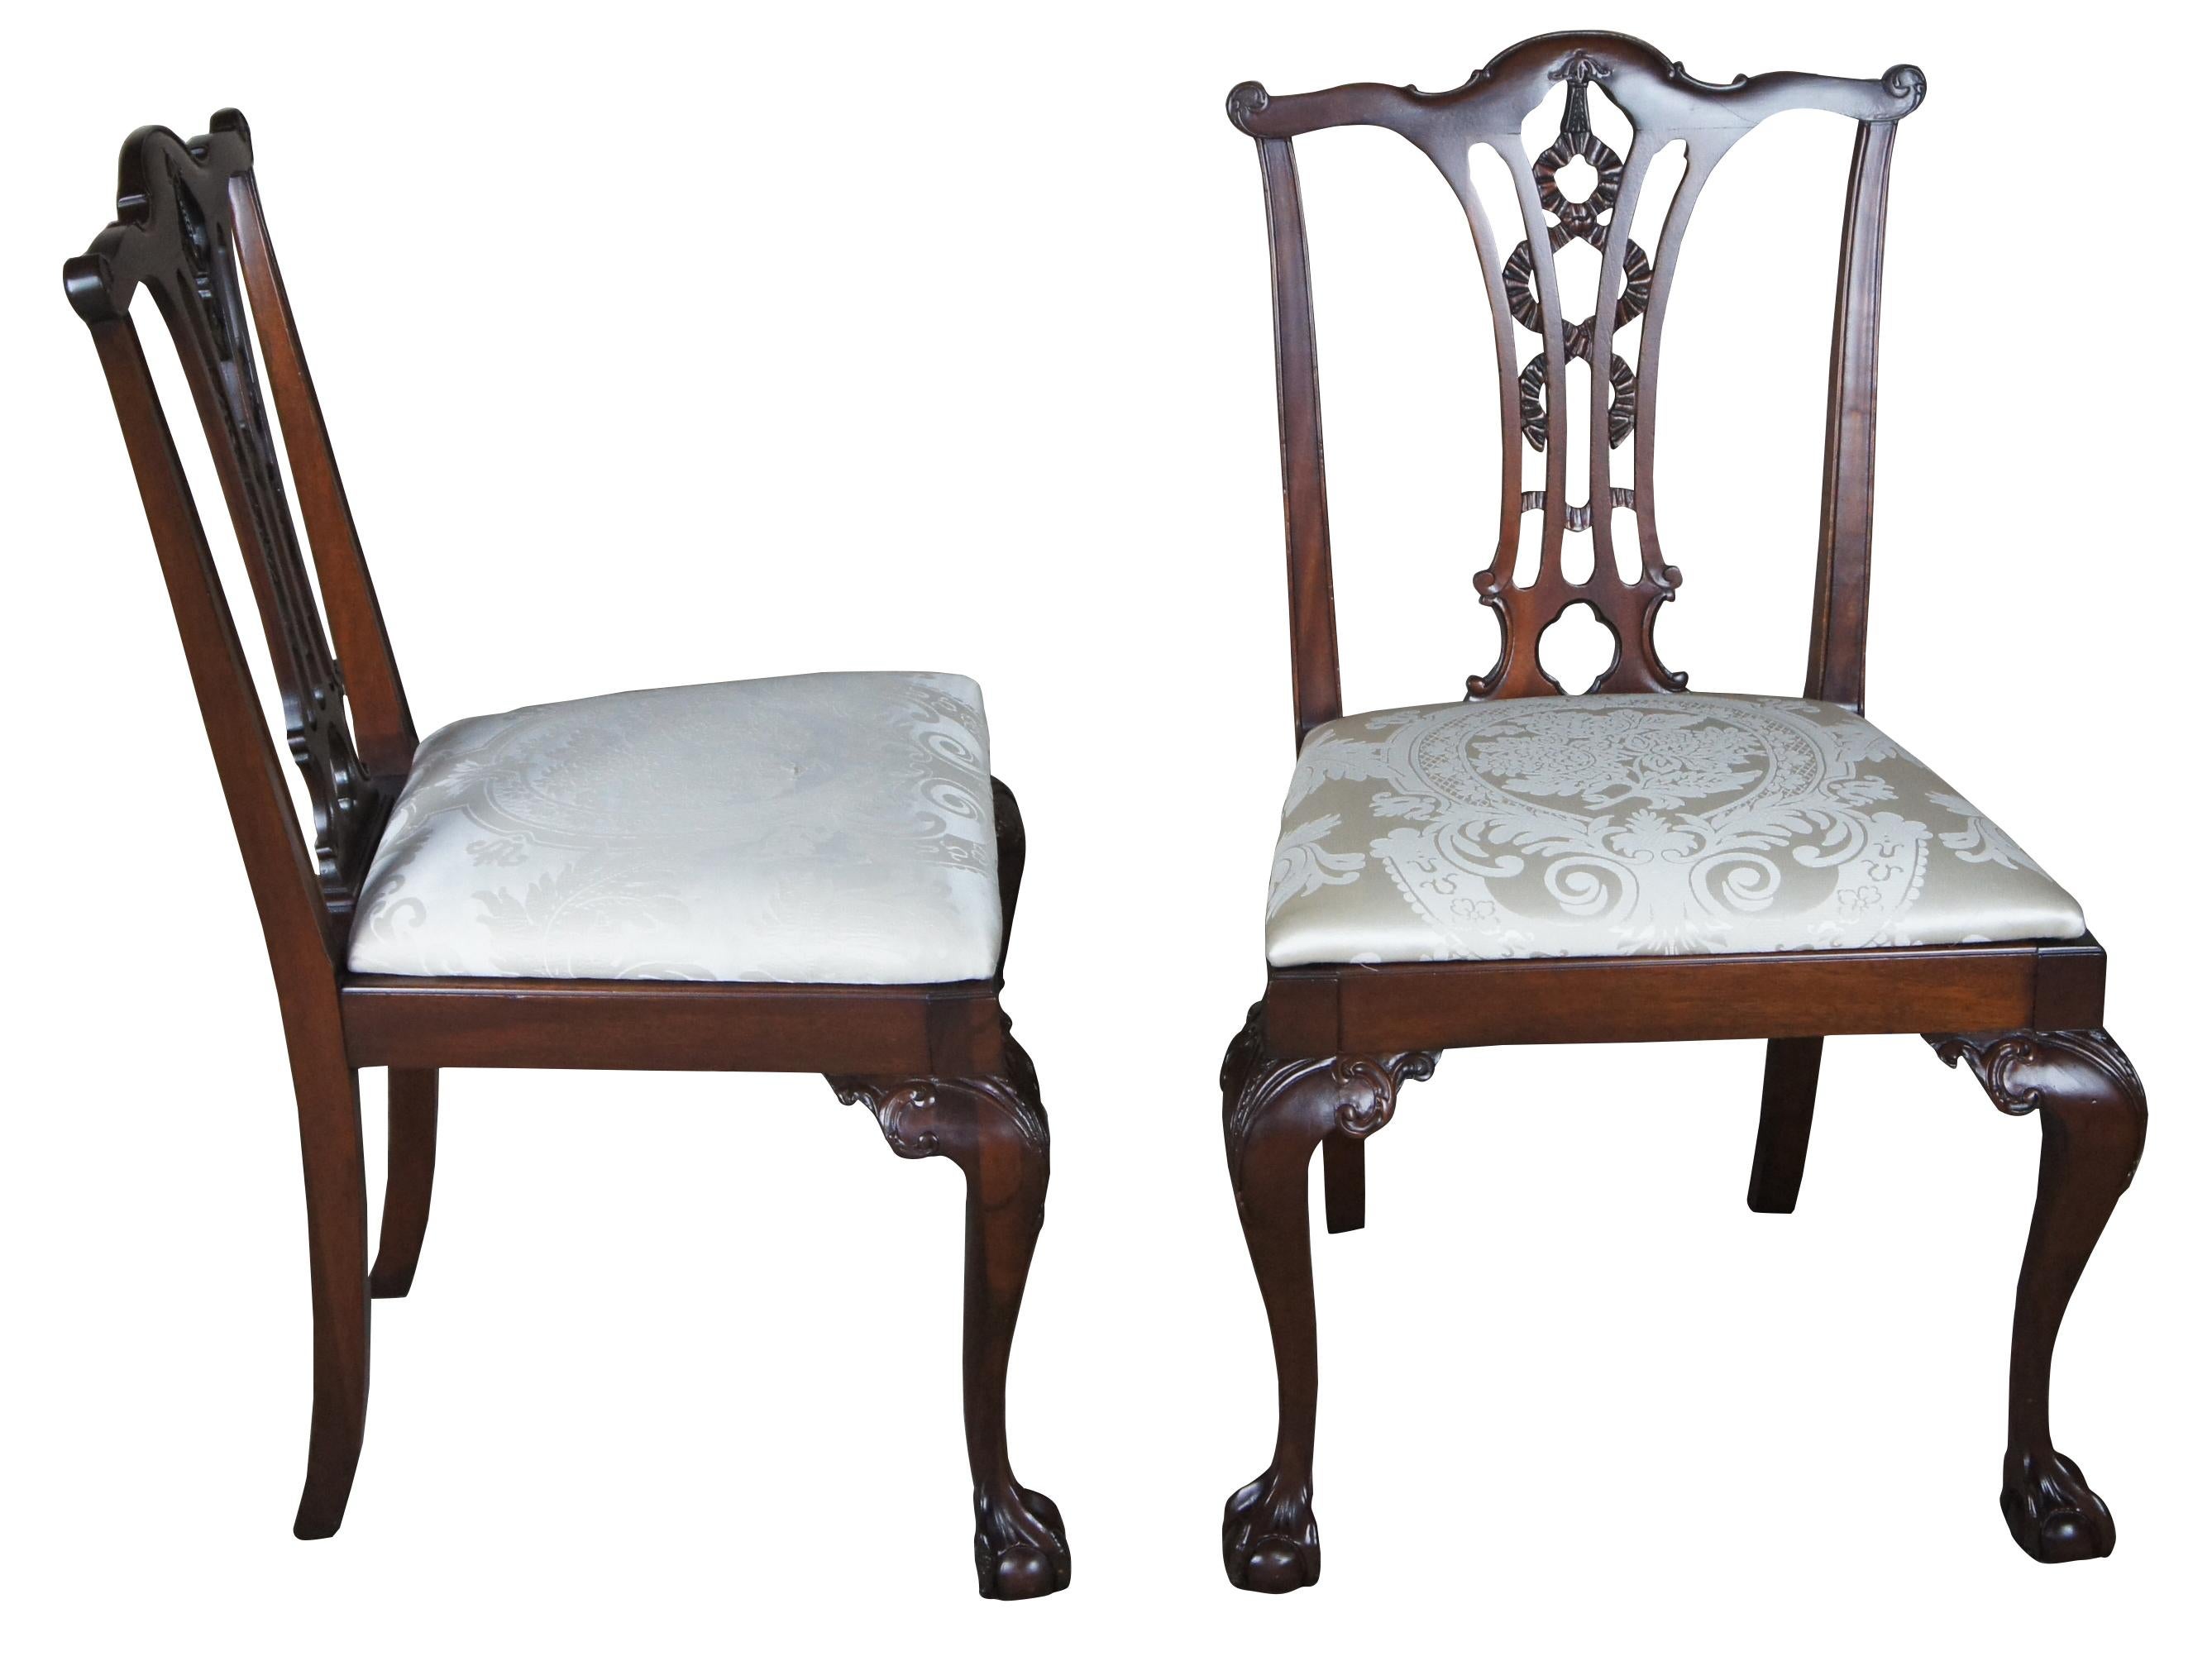 Antique Chippendale style ribbon back dining chairs ball and claw side accent

Two antique Chippendale style side chairs. Made from mahogany with vertical slat back and ribbon design. Features cabriole legs leading to ball and claw foot.